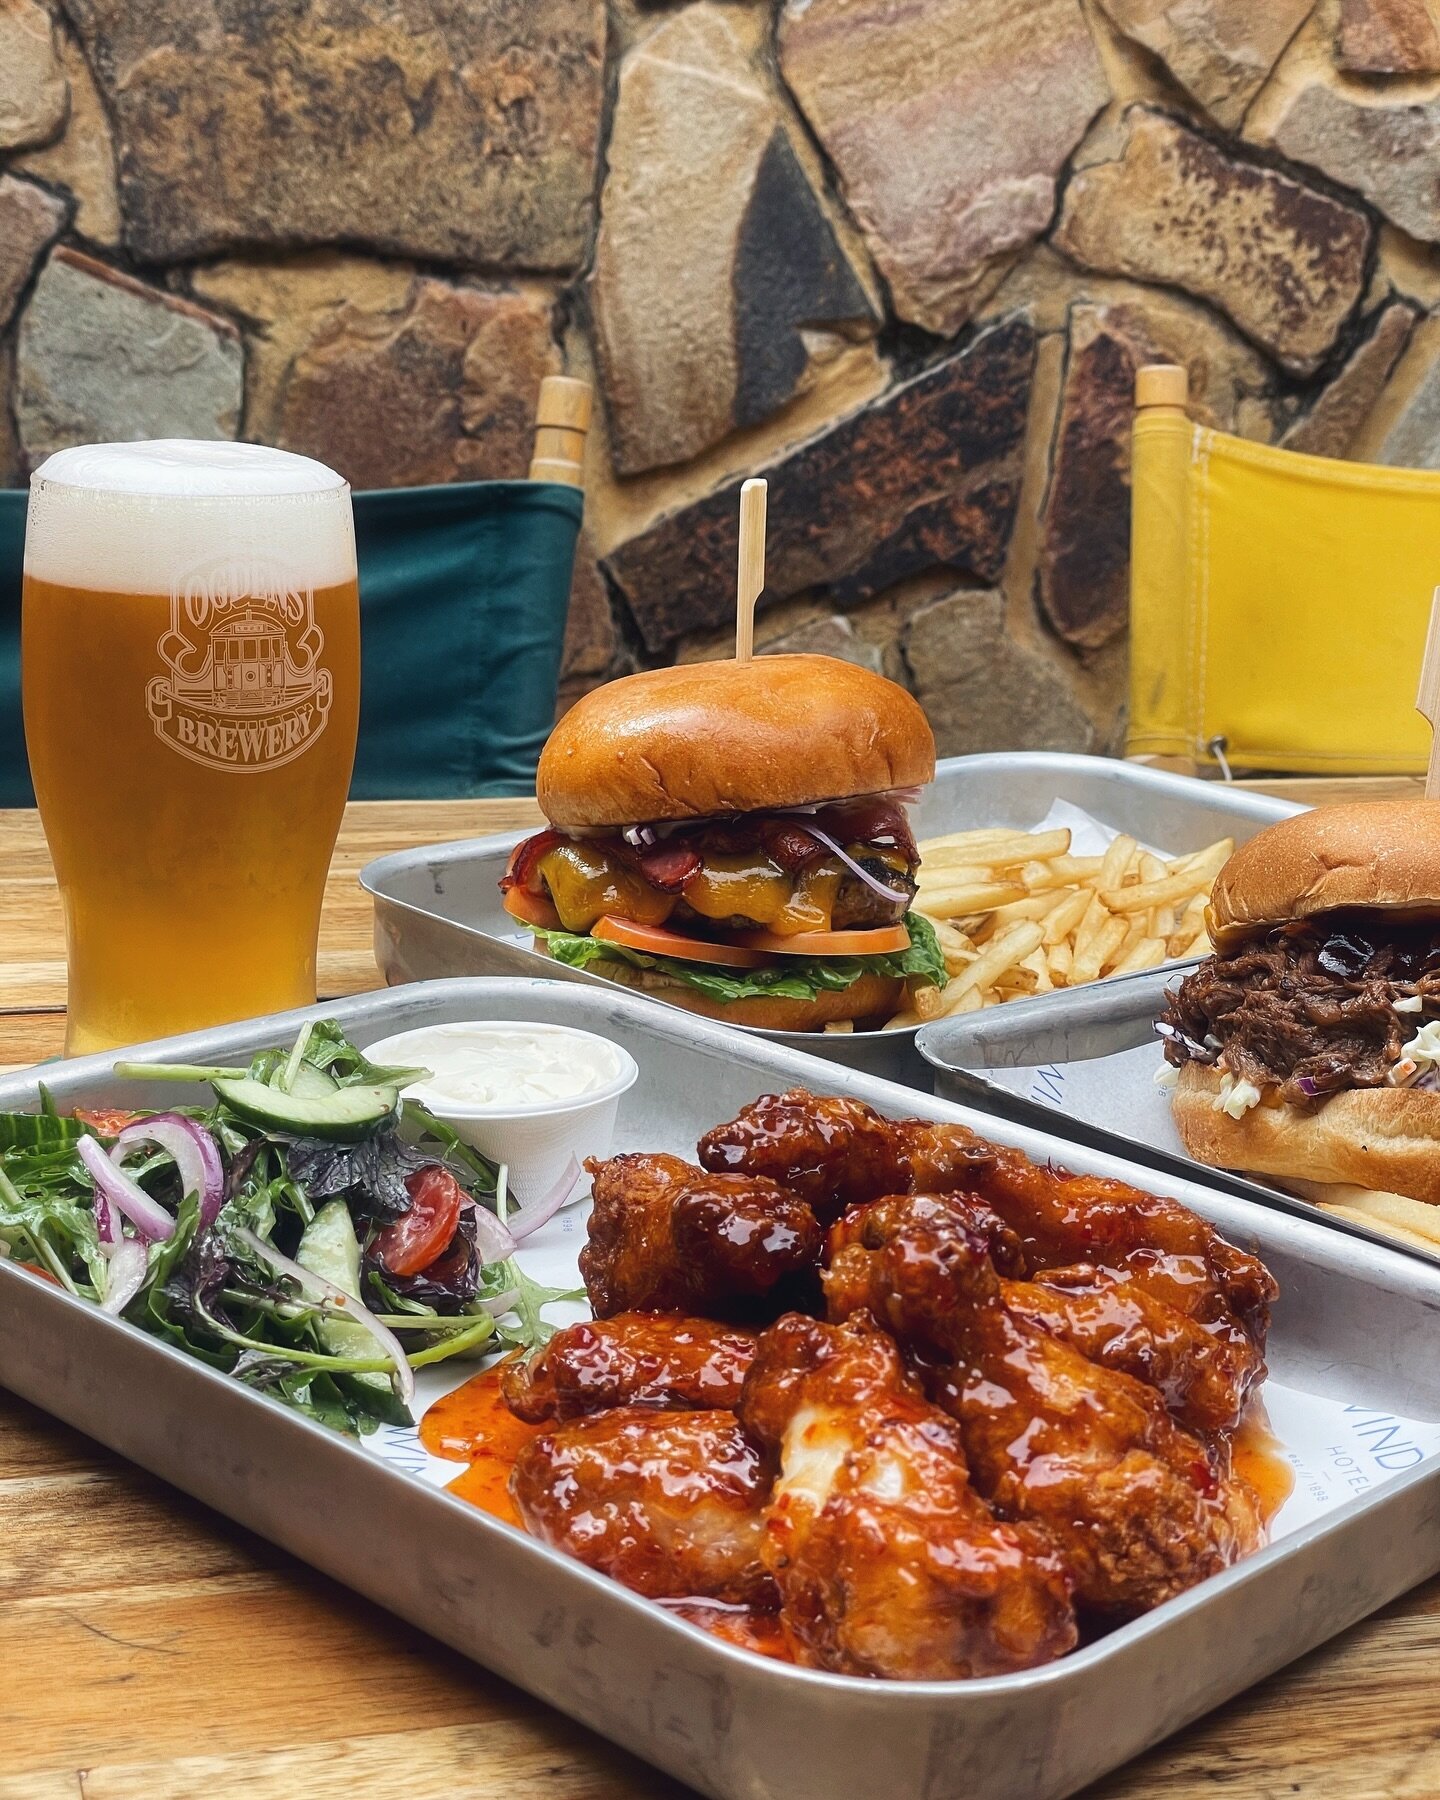 Southern Fried Sweet Chilli Chicken Wings, Pulled BBQ Beef Burger and our famous Wagyu Beef Burger are firing up our pass! 🔥 

Our chefs dish up delicious pub specials everyday in Mends St Bar. 

Pair it with an icy-cold 🍺 Ogdens Beer, fresh from t